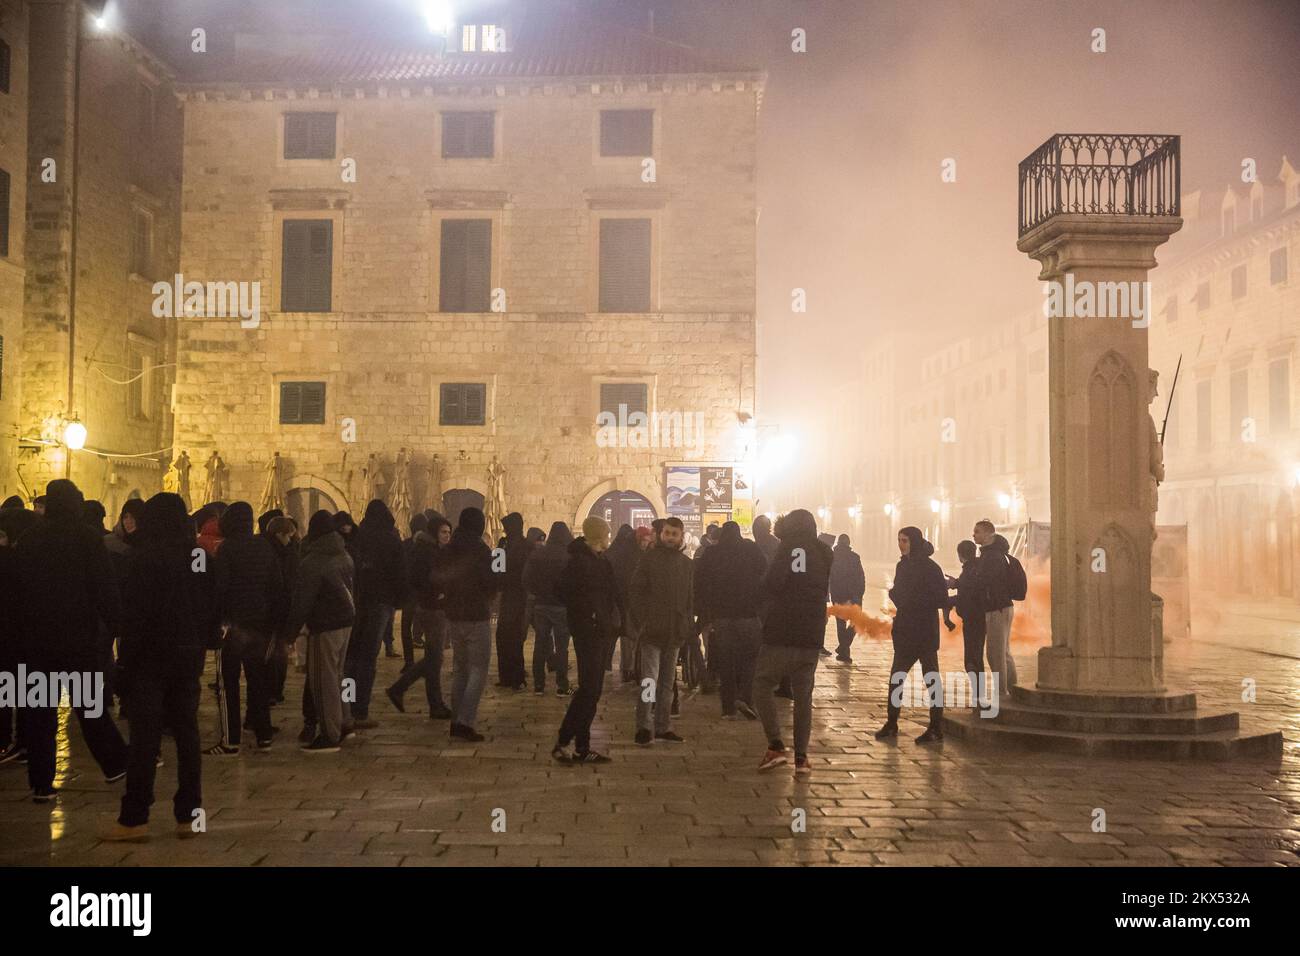 27.02.2018., Dubrovnik, Croatia - Supporters of HNK Hajduk, Torcida, burn flares in front of The Church of St. Blaise. Photo: Grgo Jelavic/PIXSELL Stock Photo